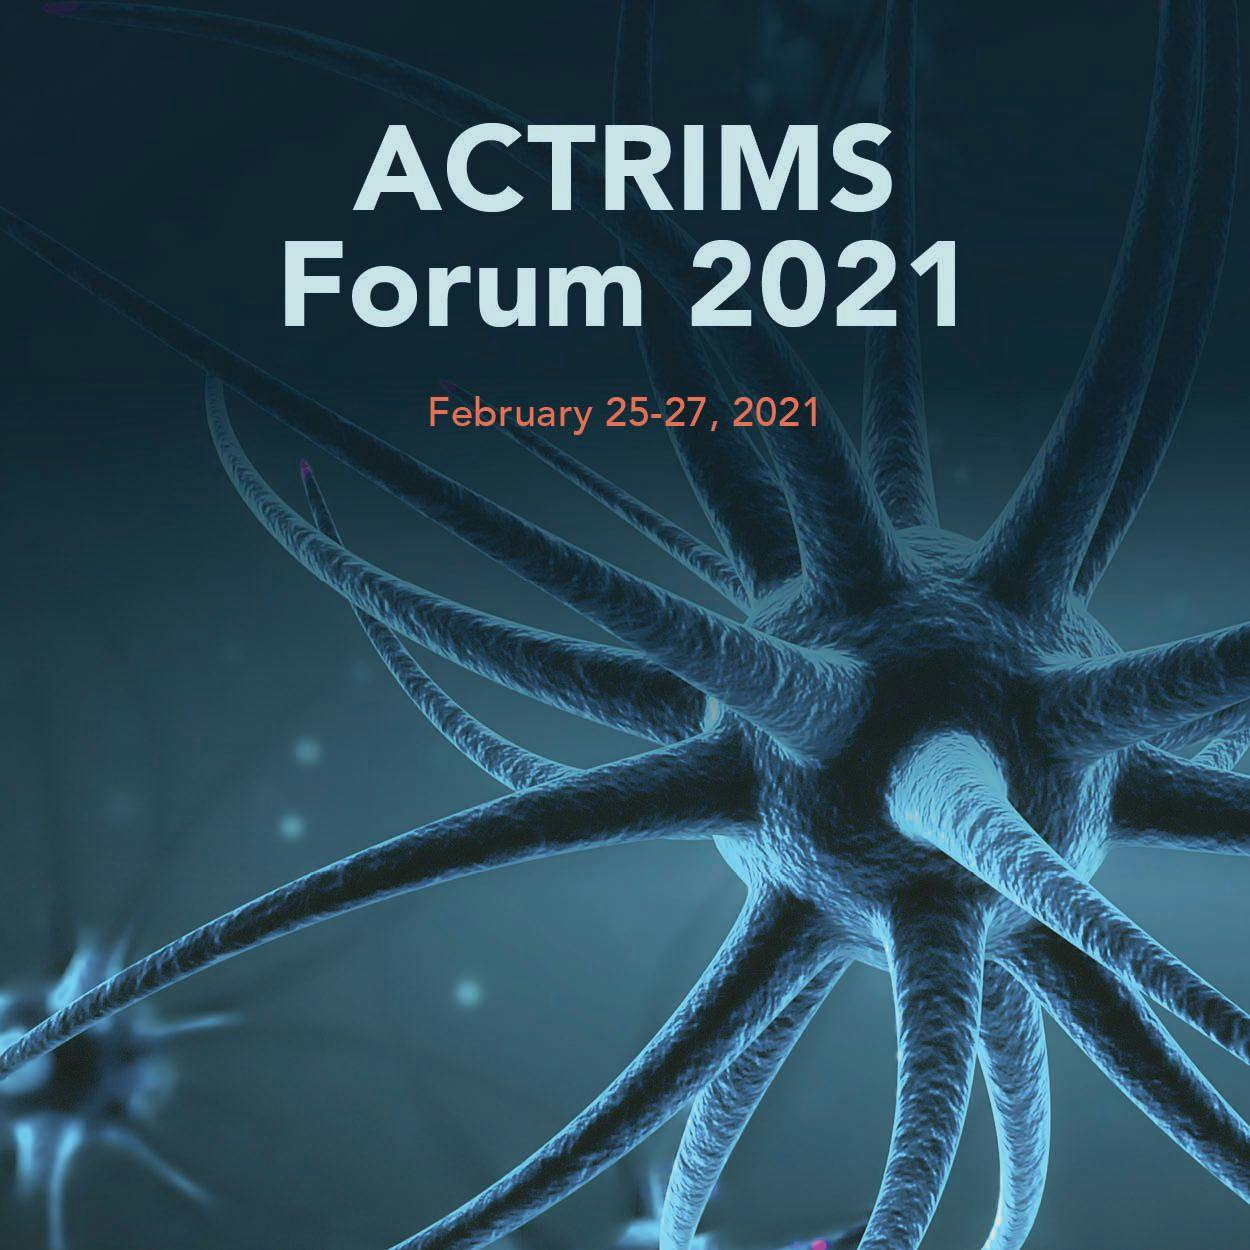 ACTRIMS Forum 2021: Pre-Conference Expert Perspective